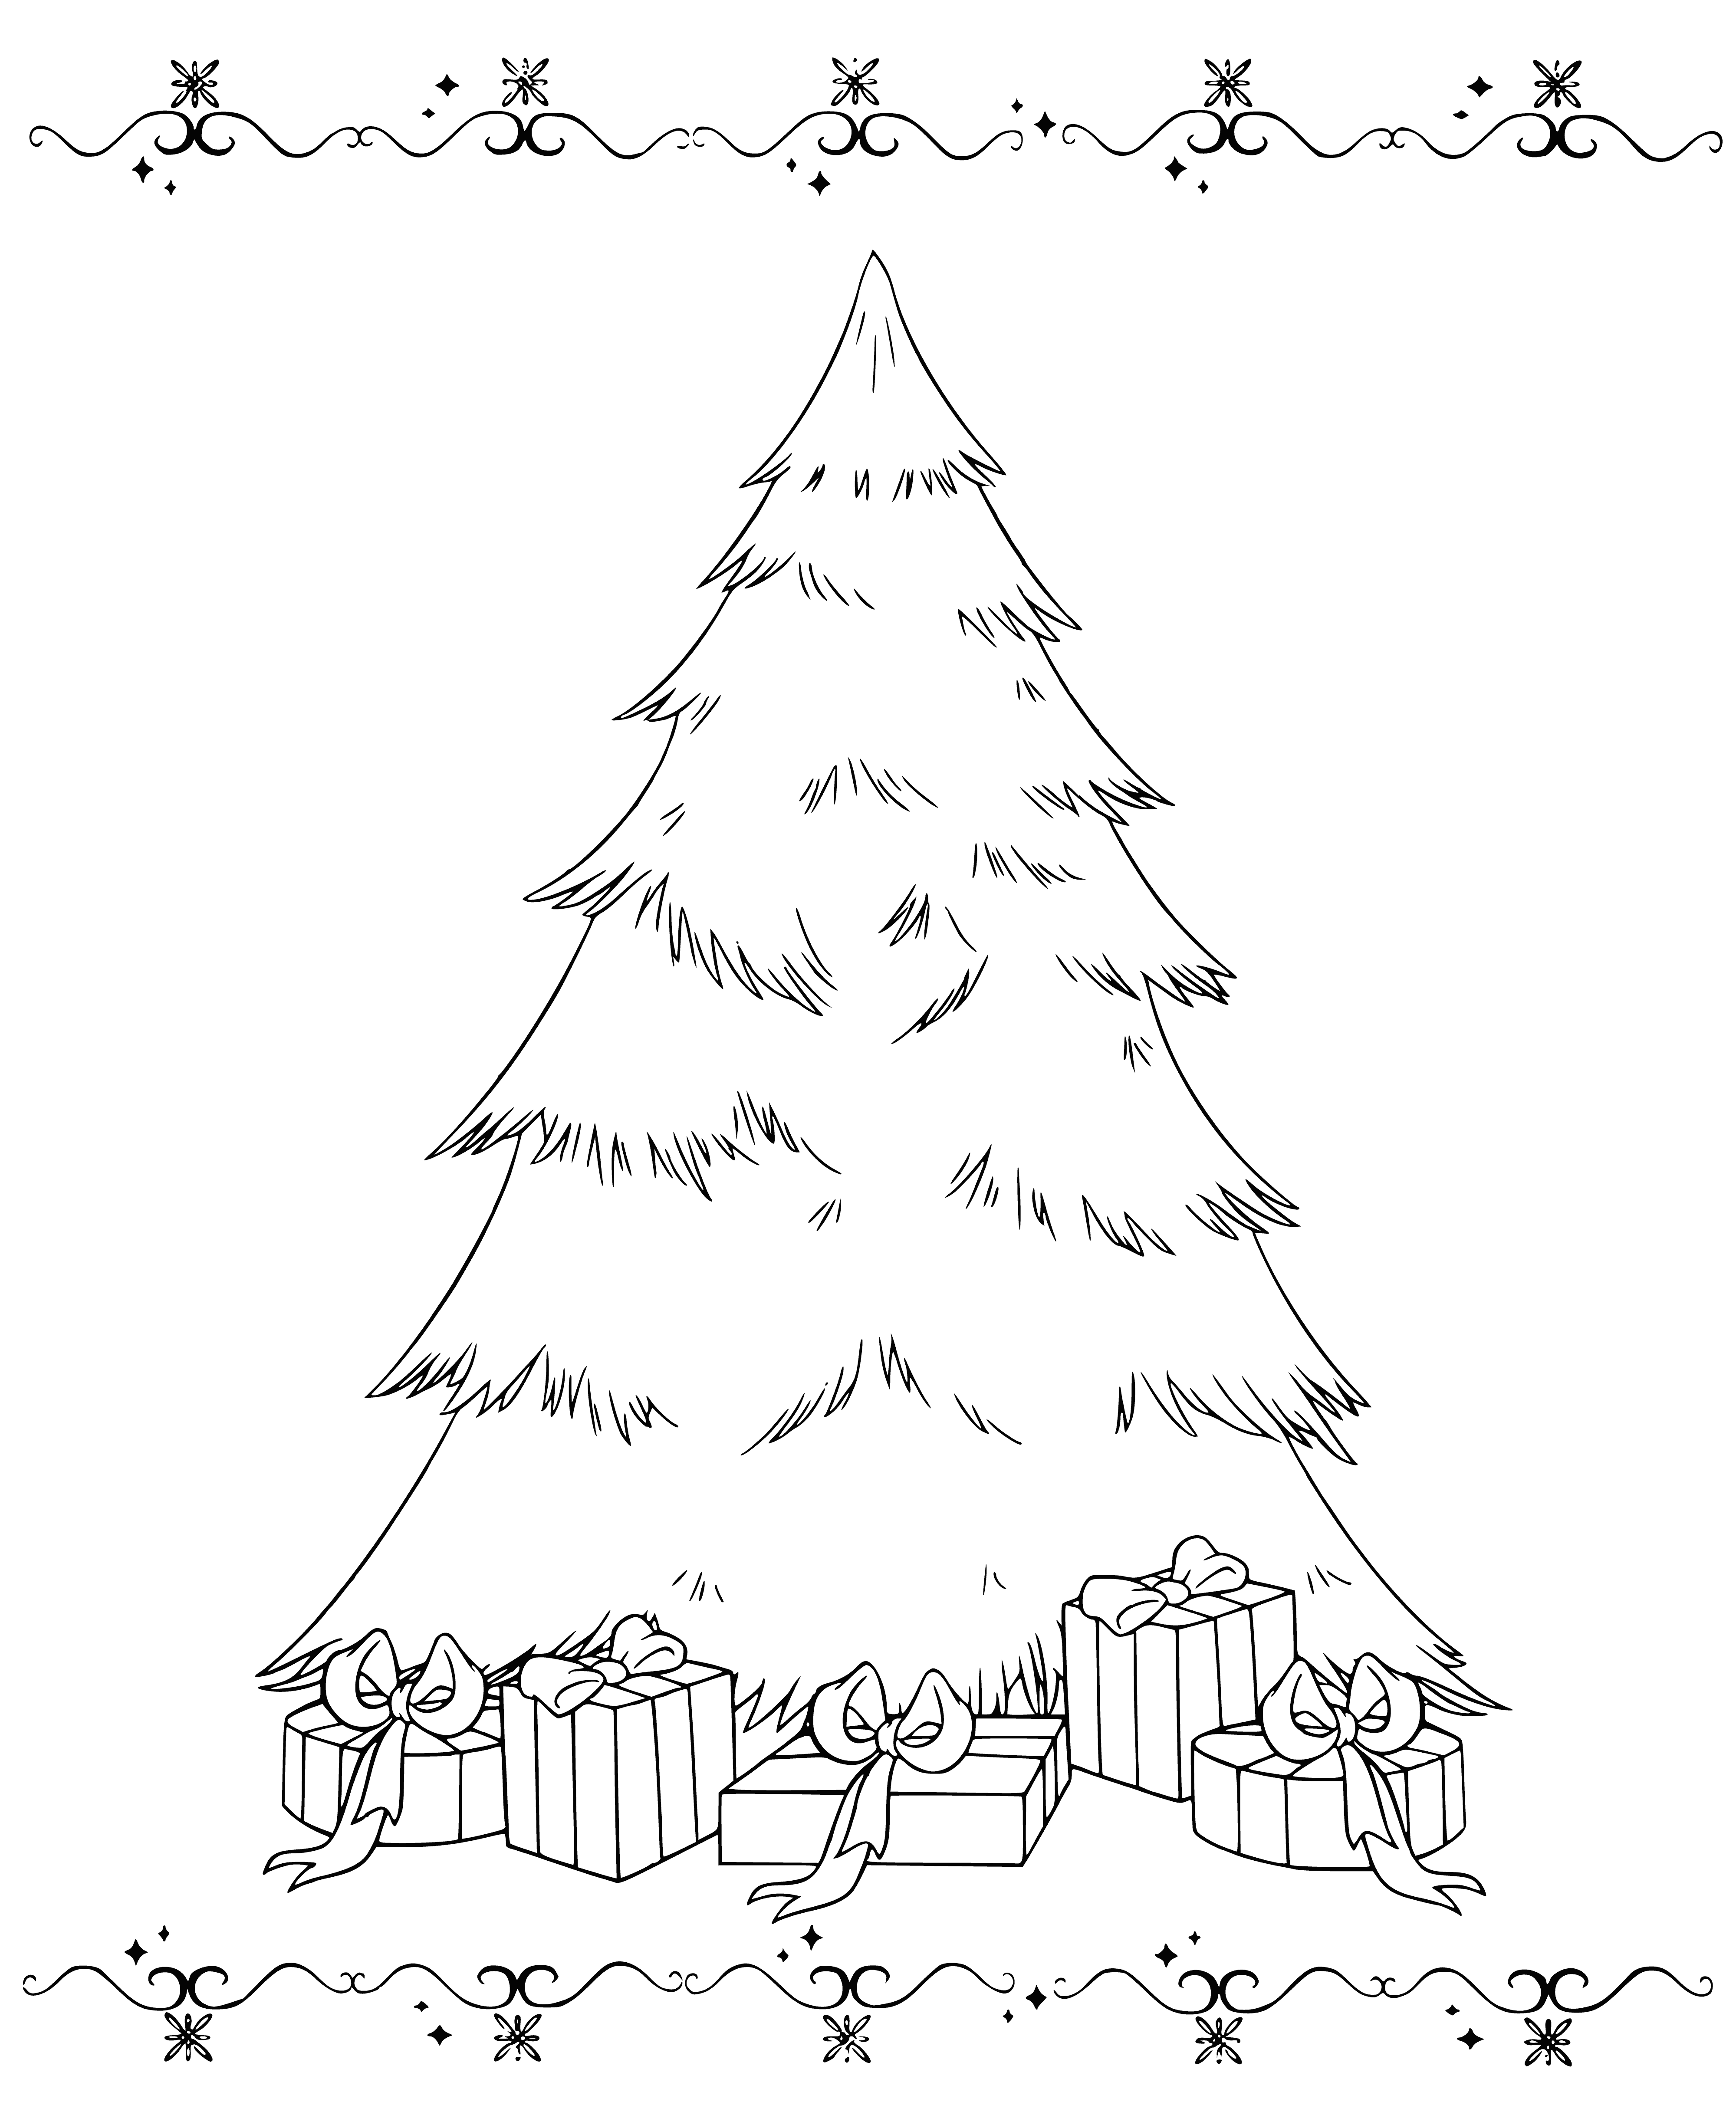 coloring page: Disney princesses celebrate New Year by decorating a Christmas tree. Each holds a decoration: Snow White a star, Ariel a shell, etc. They're having a lot of fun!